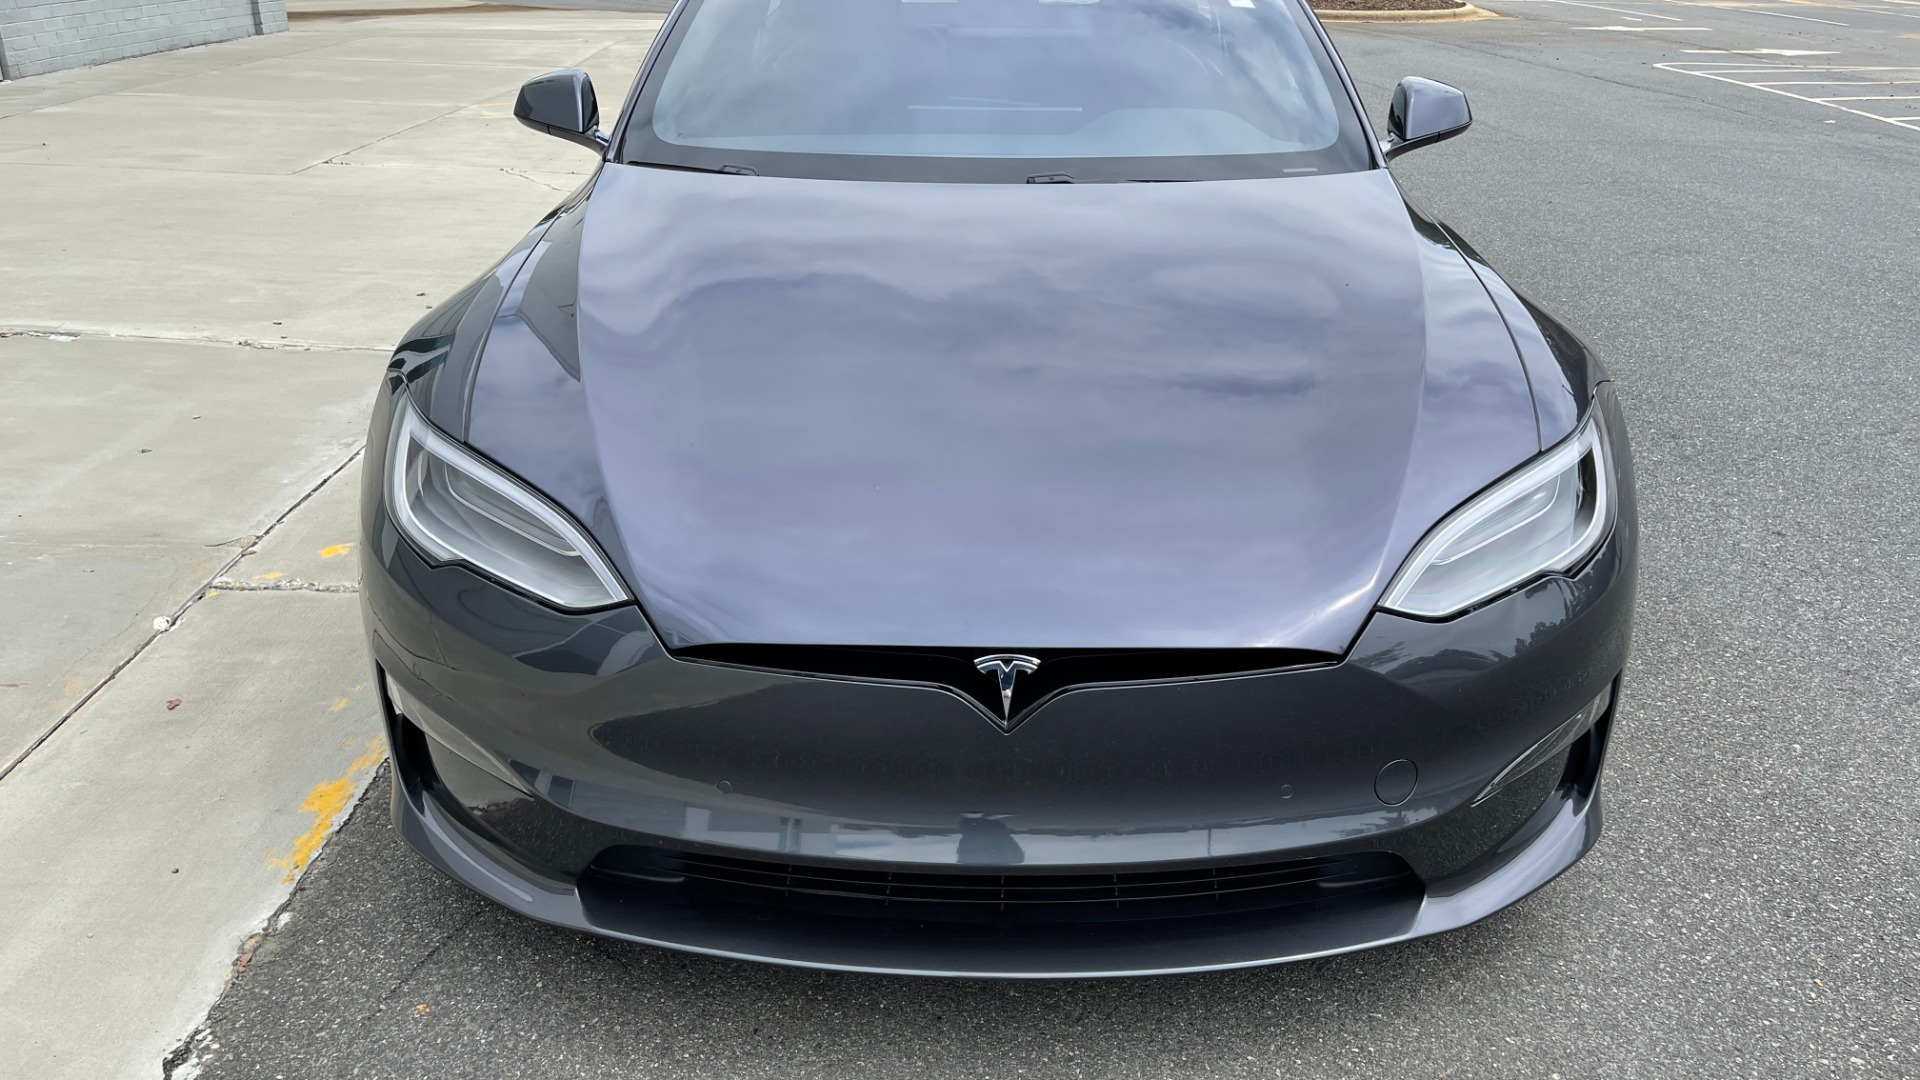 Used 2021 Tesla Model S Plaid / FULL SELF DRIVING / 21IN WHEELS / CARBON FIBER TRIM / PREMIUM CONNE for sale $134,000 at Formula Imports in Charlotte NC 28227 5